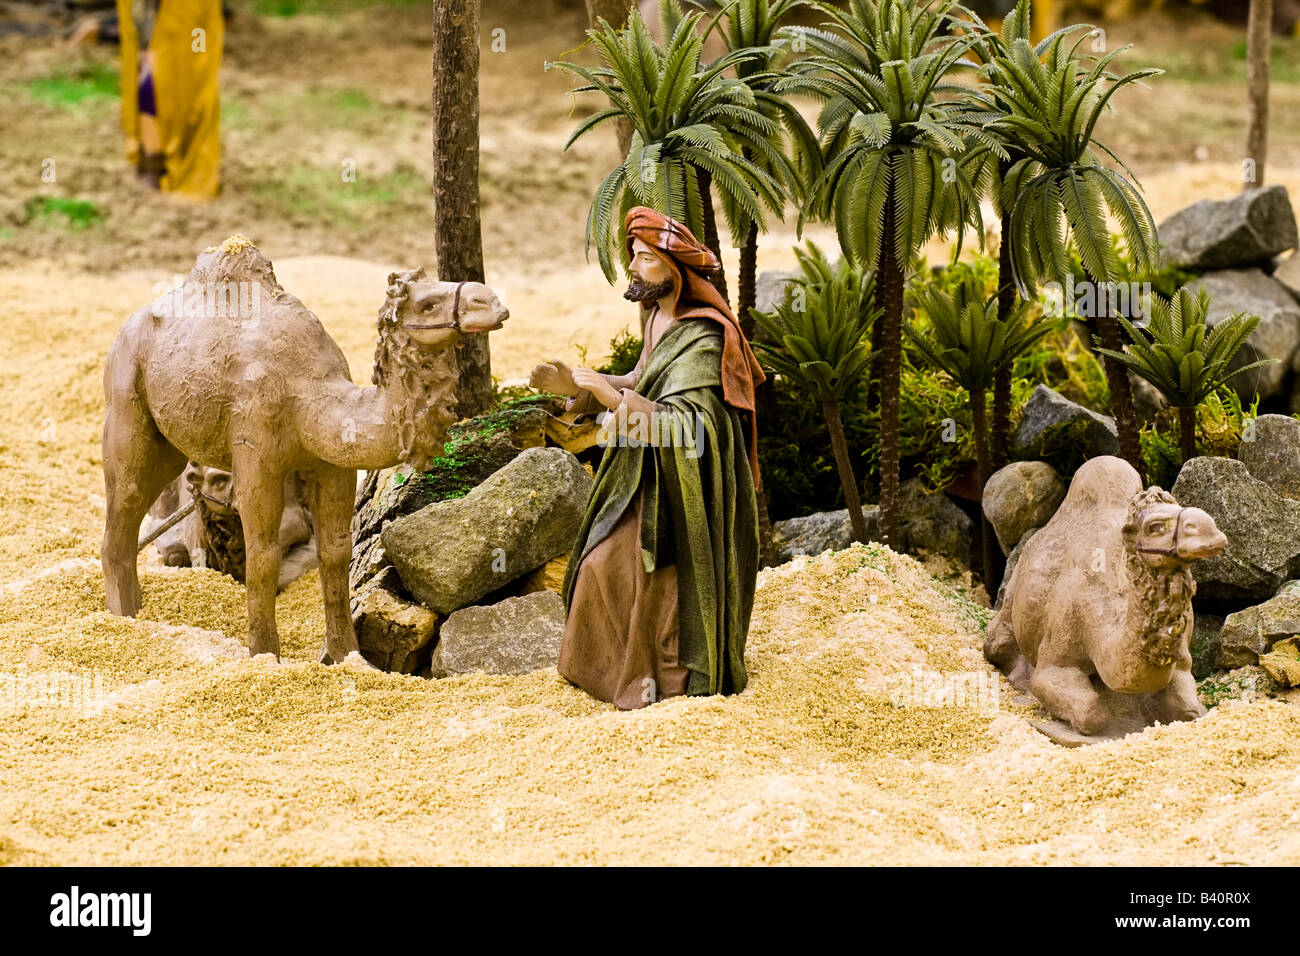 Arabic man with camels figurines in a crib scene Stock Photo - Alamy